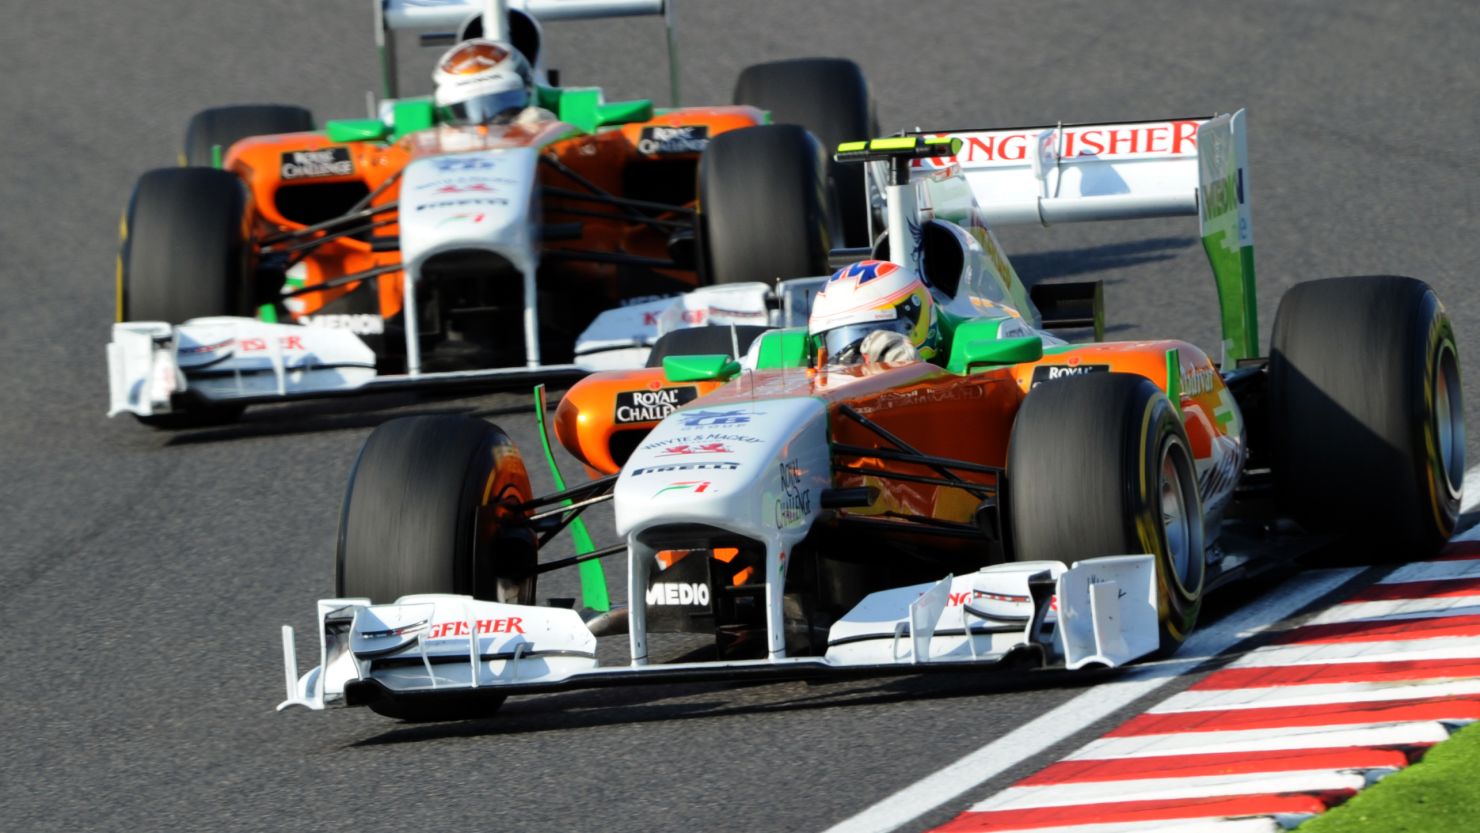 Force India became the Asian country's first Formula One team when they made their debut in 2008.